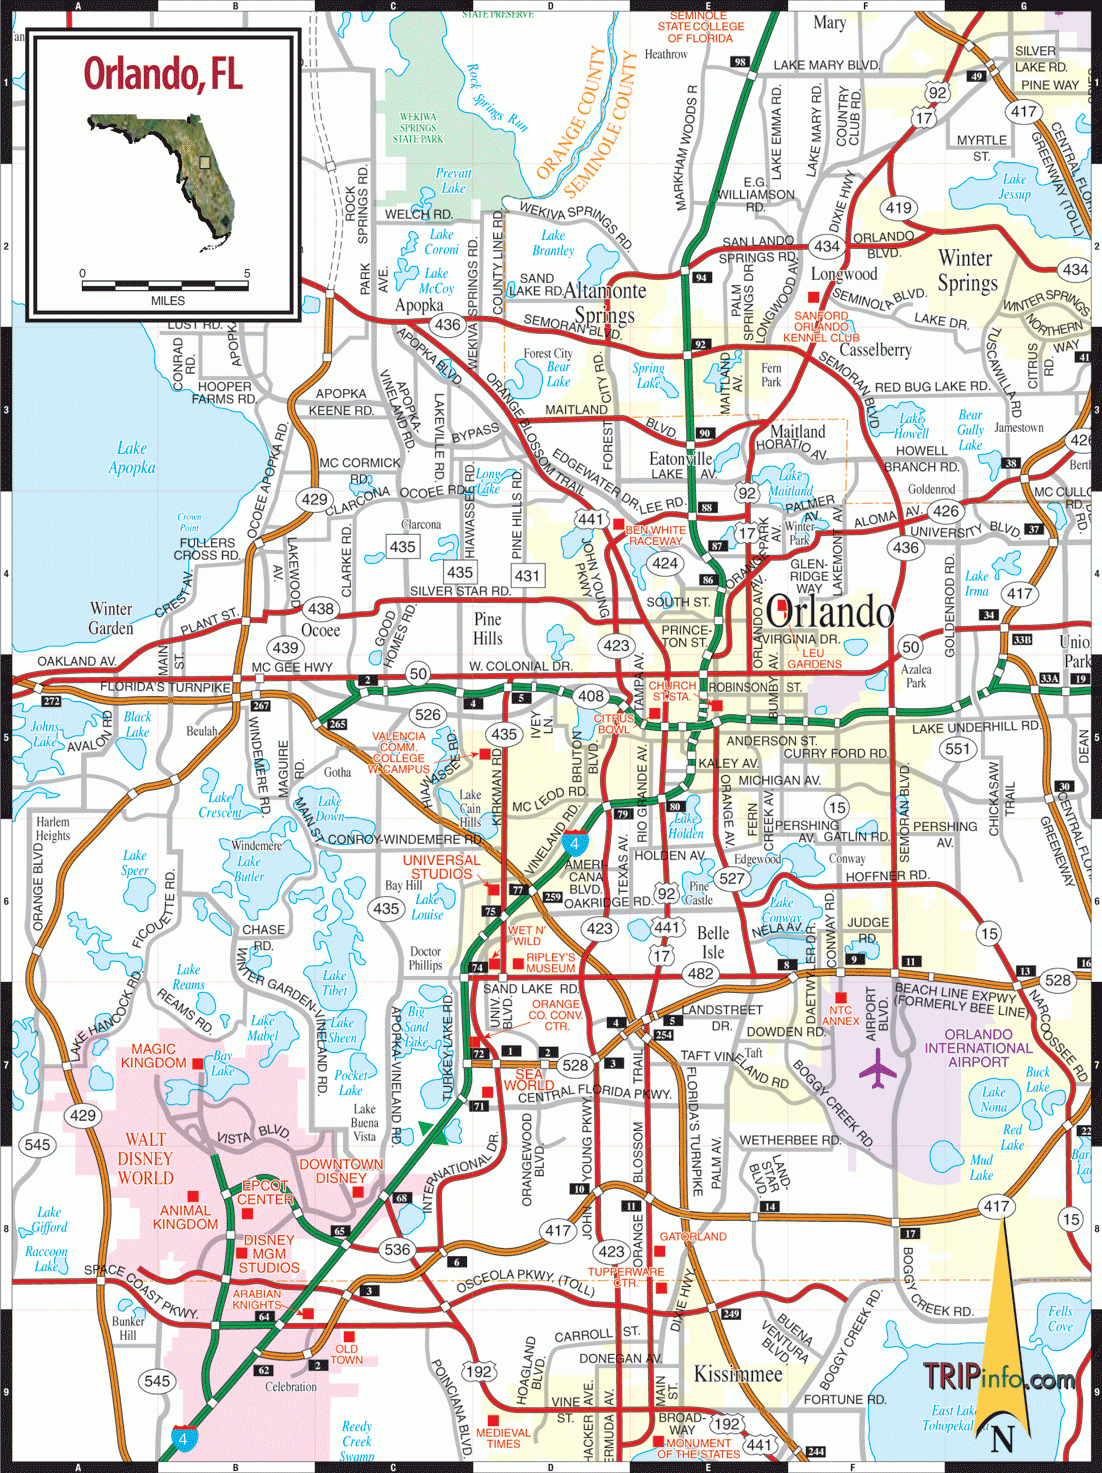 Orlando Map - Central Florida Attractions Map